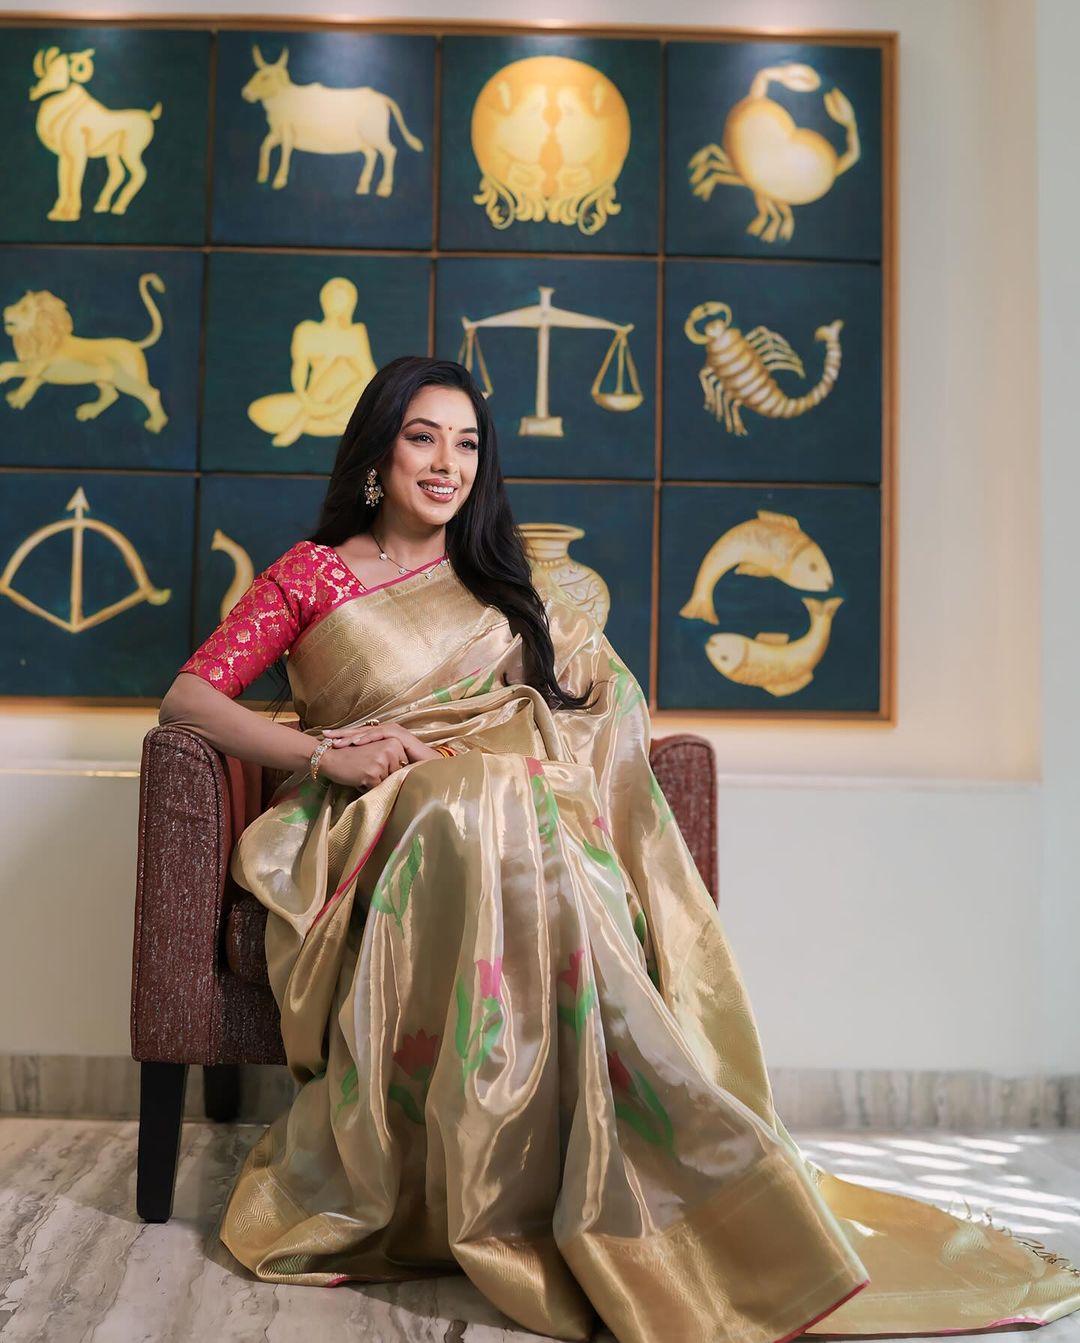 Rupali Ganguly's saree collection is the ultimate destination to find the perfect match for acing any family occasion. In this appearance, Rupali wore a stunning beige saree with lotus prints on it